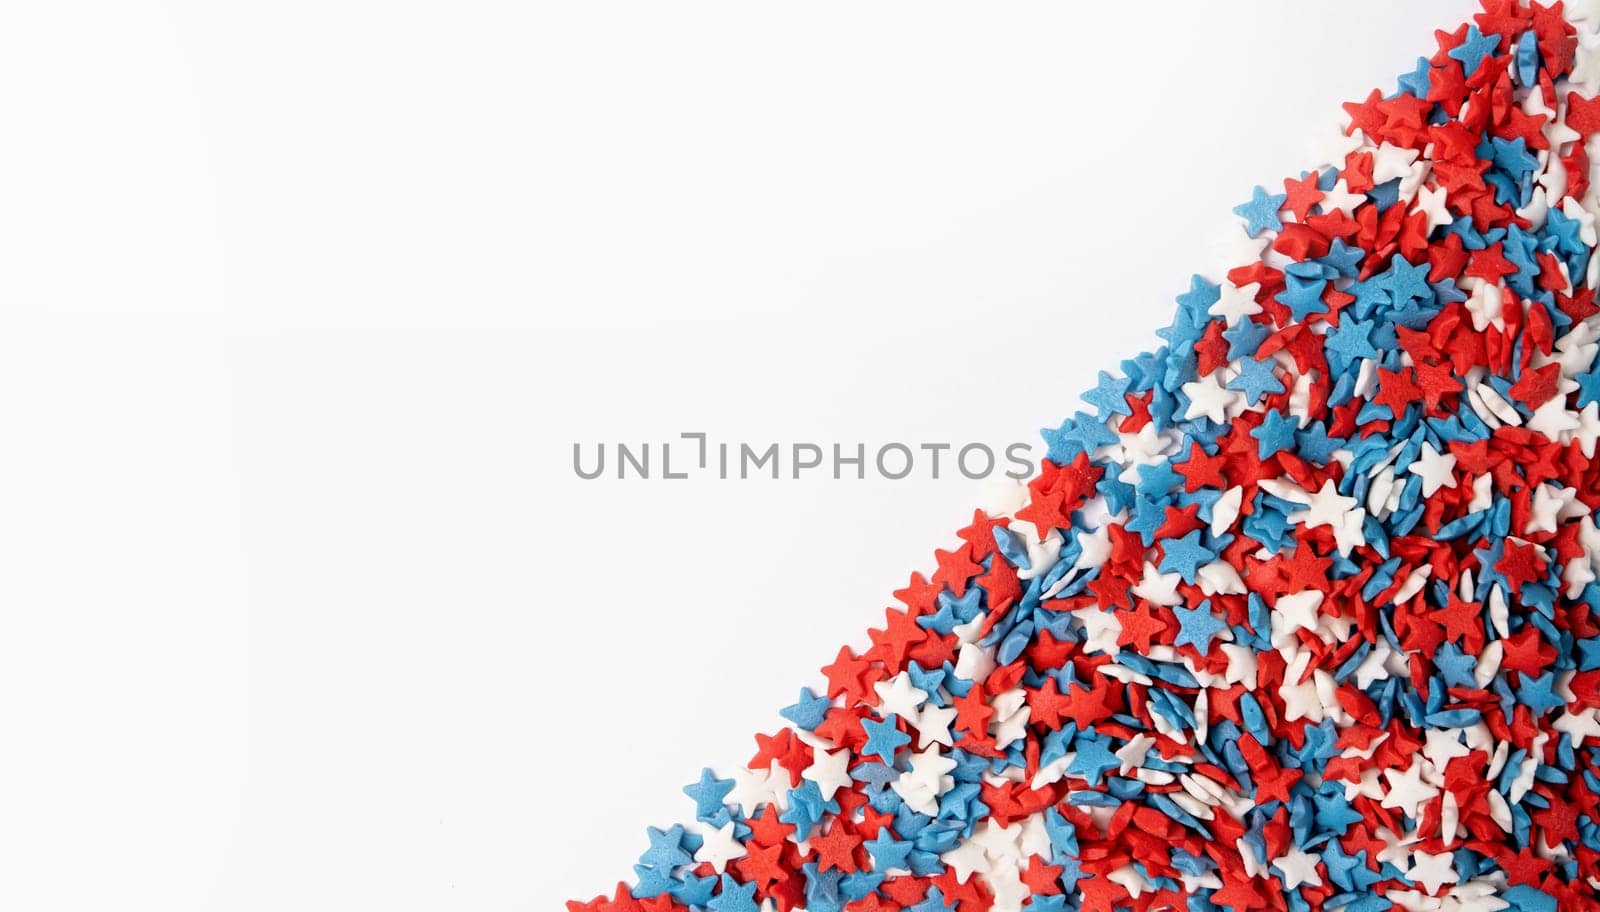 4th of July American Independence Day sprinkles decorations frame on white background, mockup